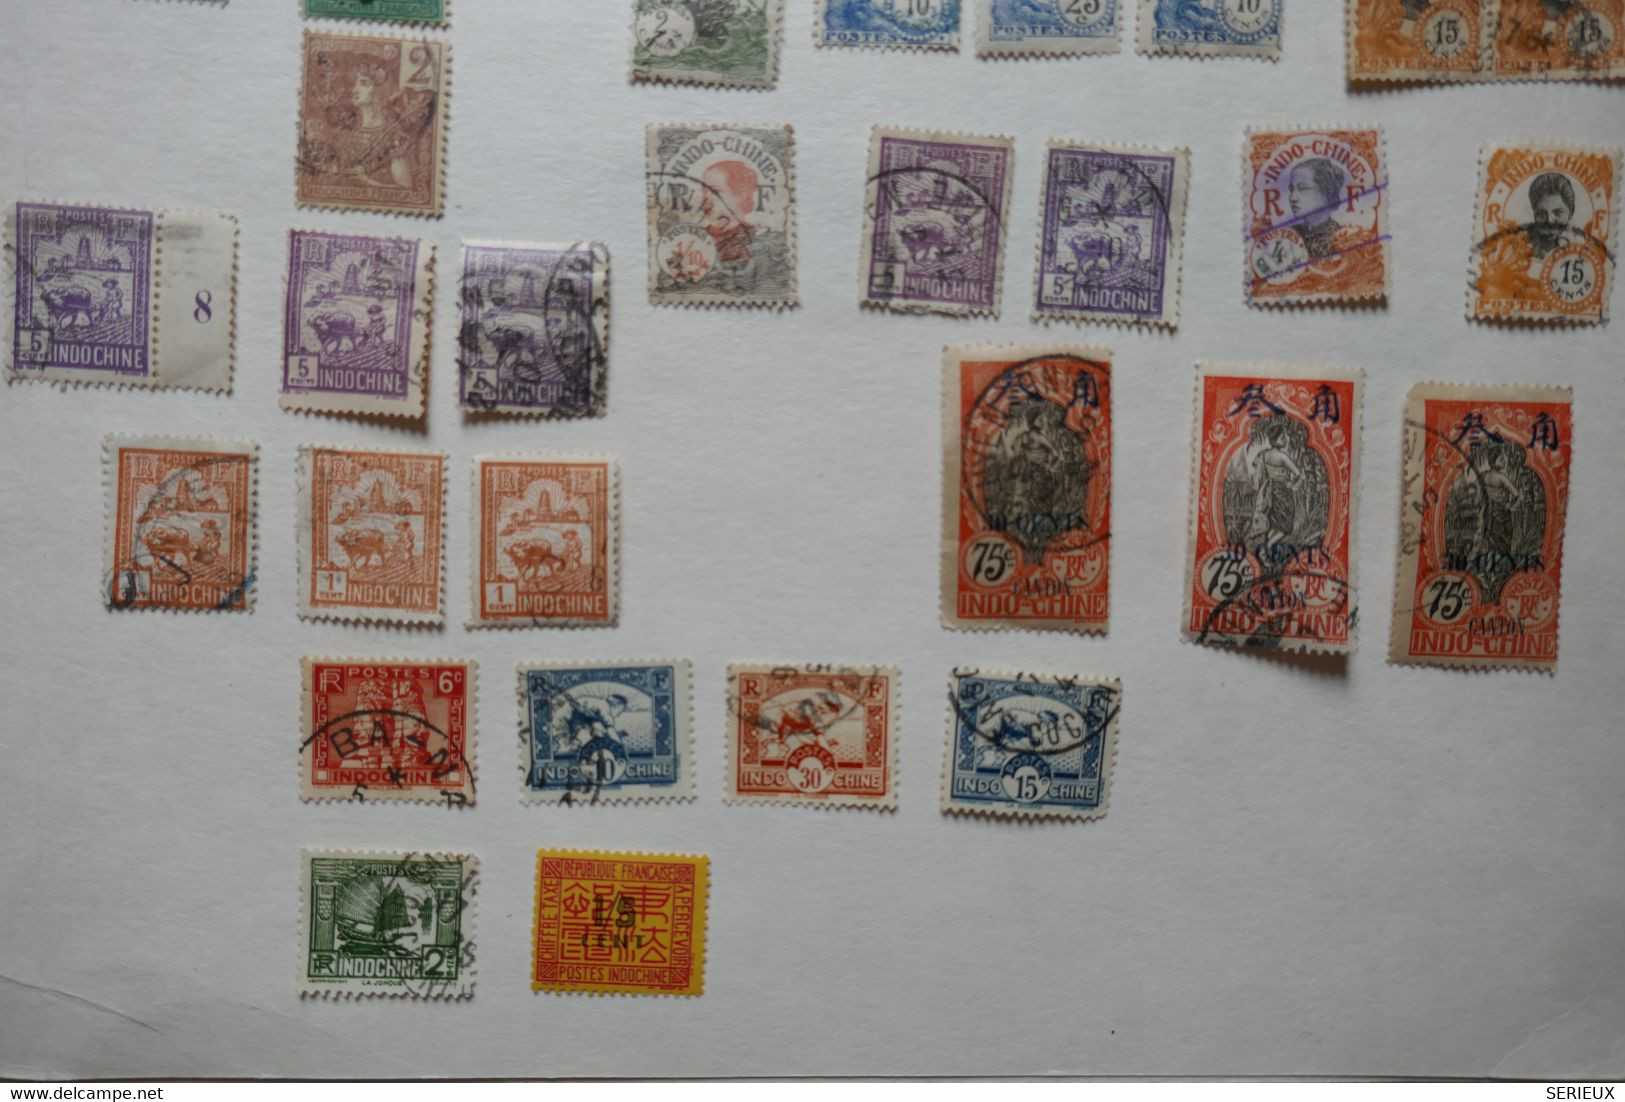 ¤3 INDO CHINA  1930  PAGE DE  TIMBRES DIVERS. SURCHARGES  +OBLITERATIONS DIVERSES A VOIR - Gebruikt